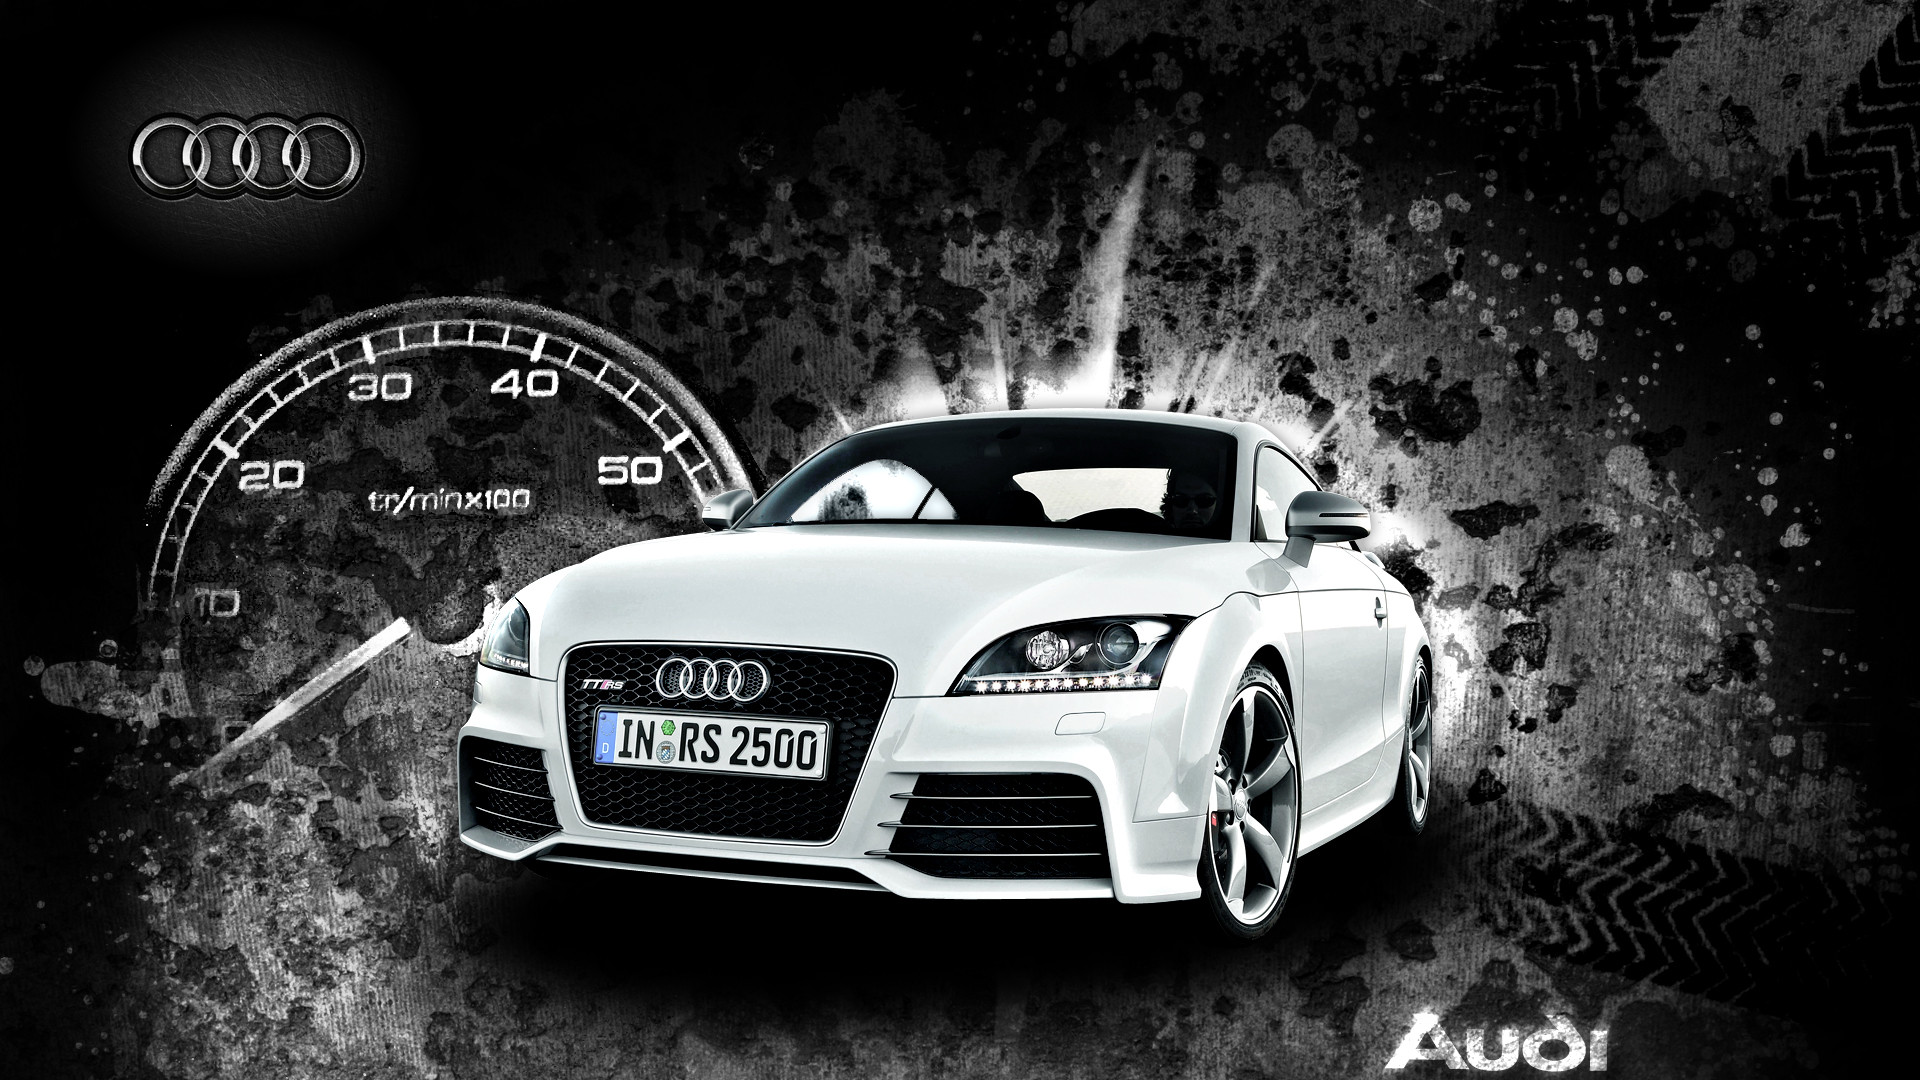 All New Audi TT RS Car Wallpapers For Desktop With High Resolution ...